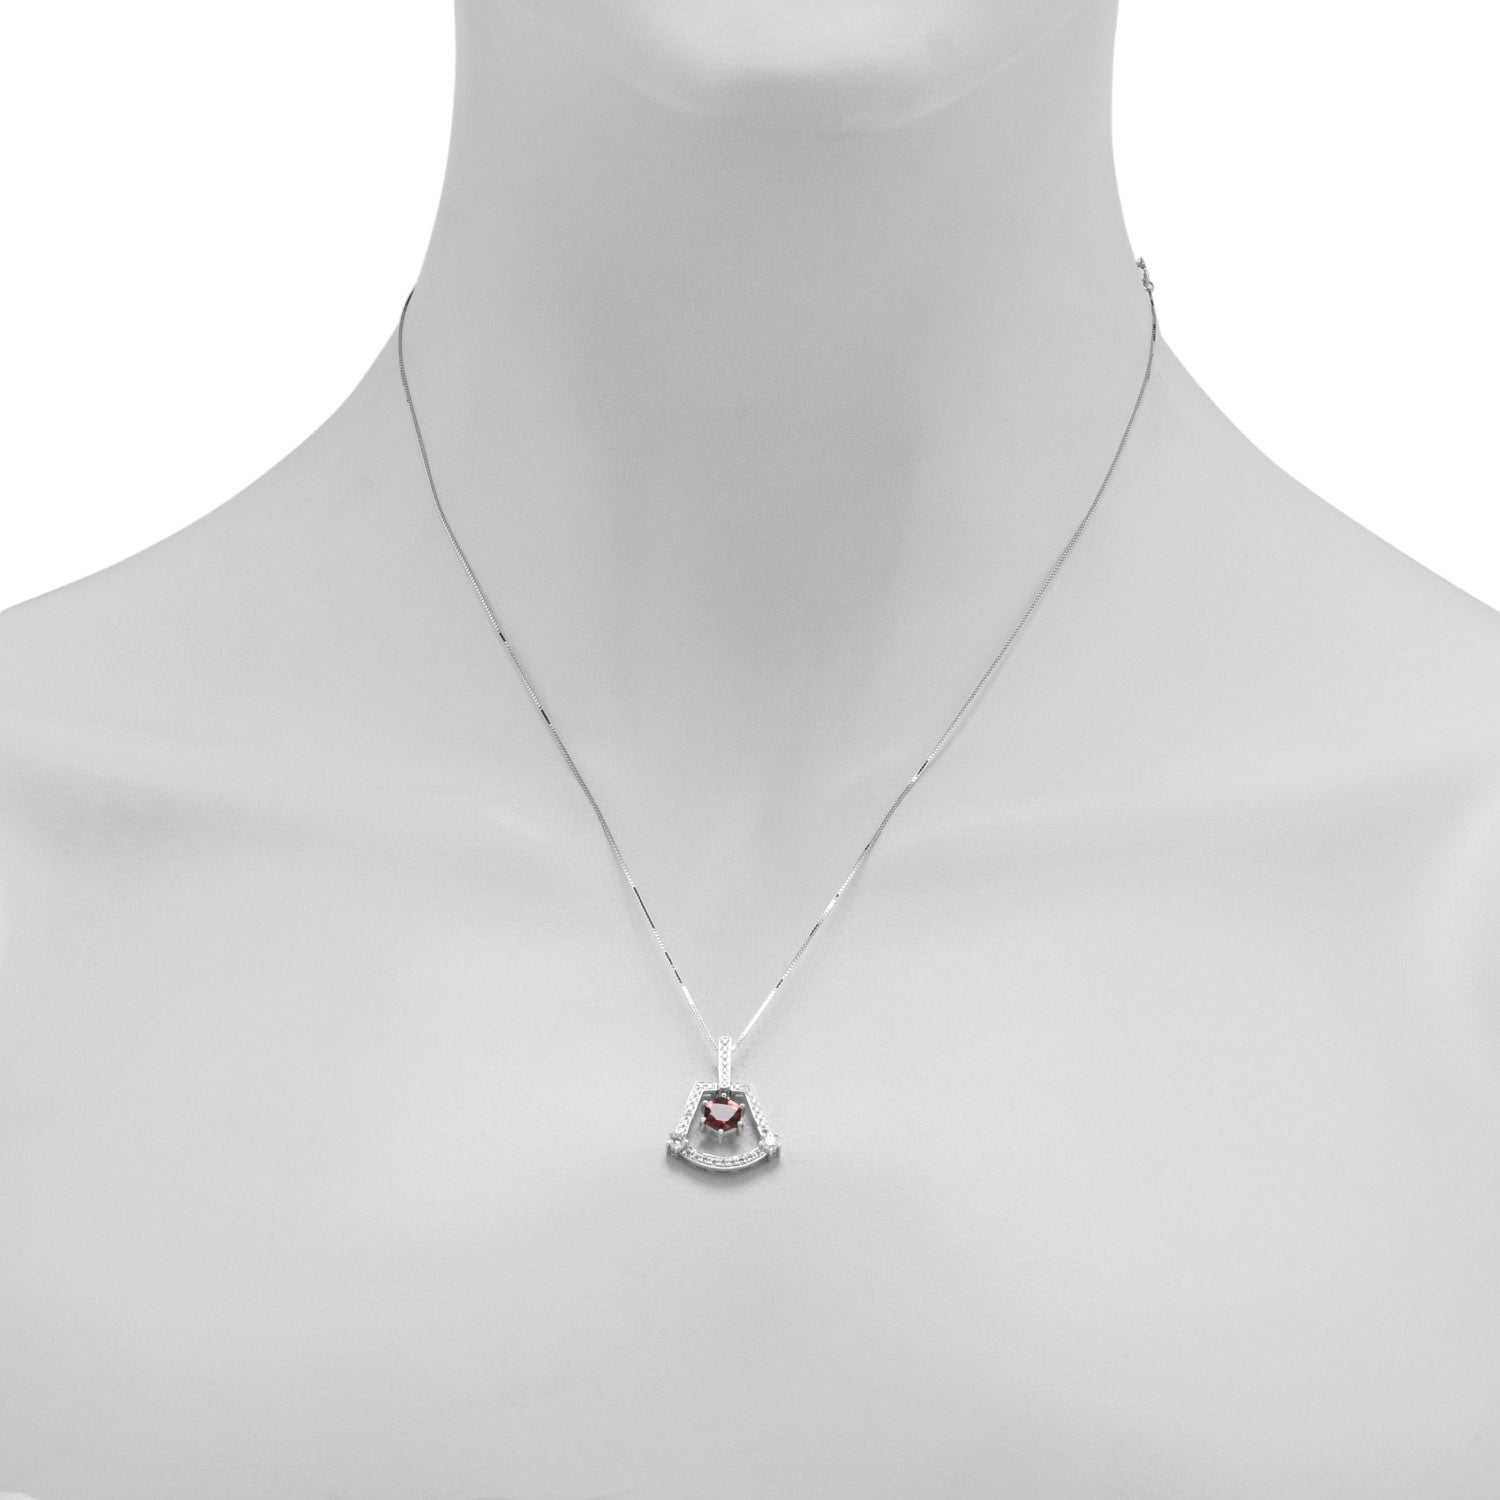 Maine Pink Tourmaline Necklace in 14kt White Gold with Diamonds (1/4ct tw)